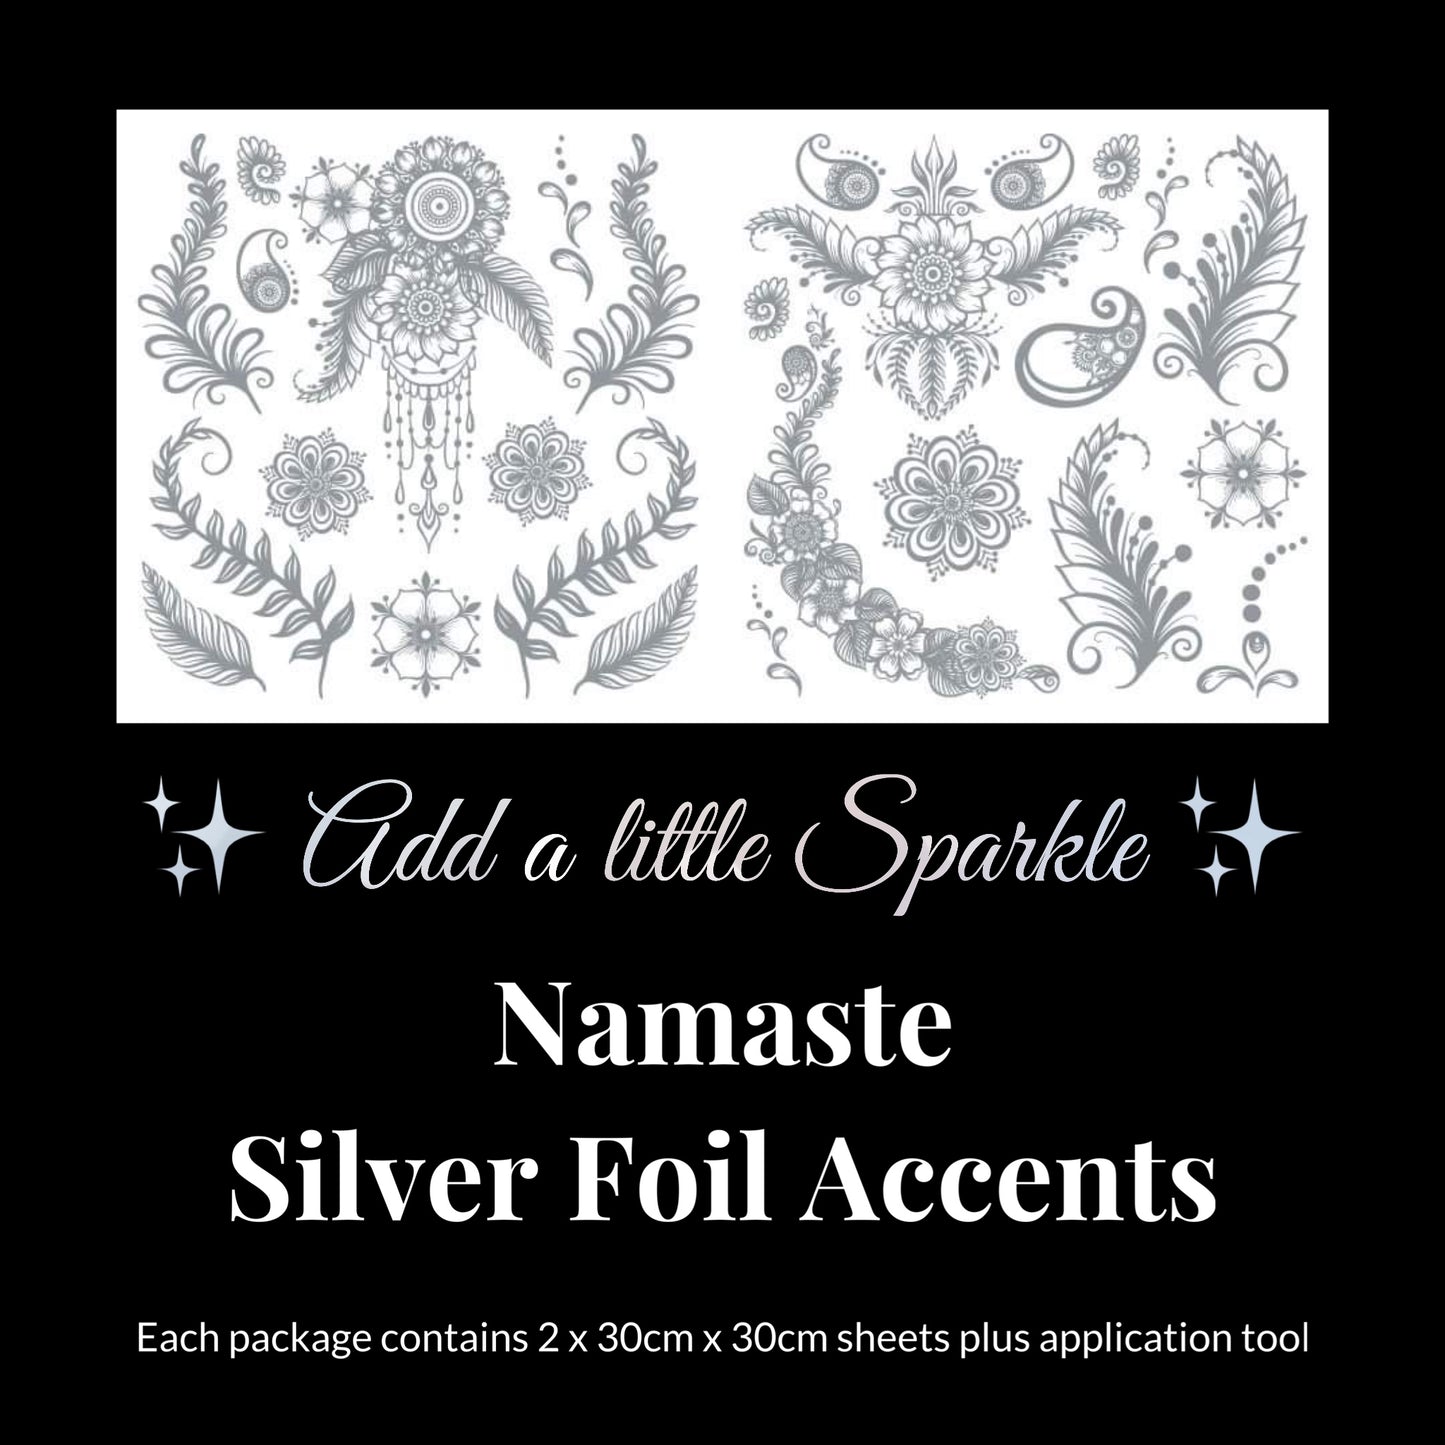 Namaste Silver Foil Accents